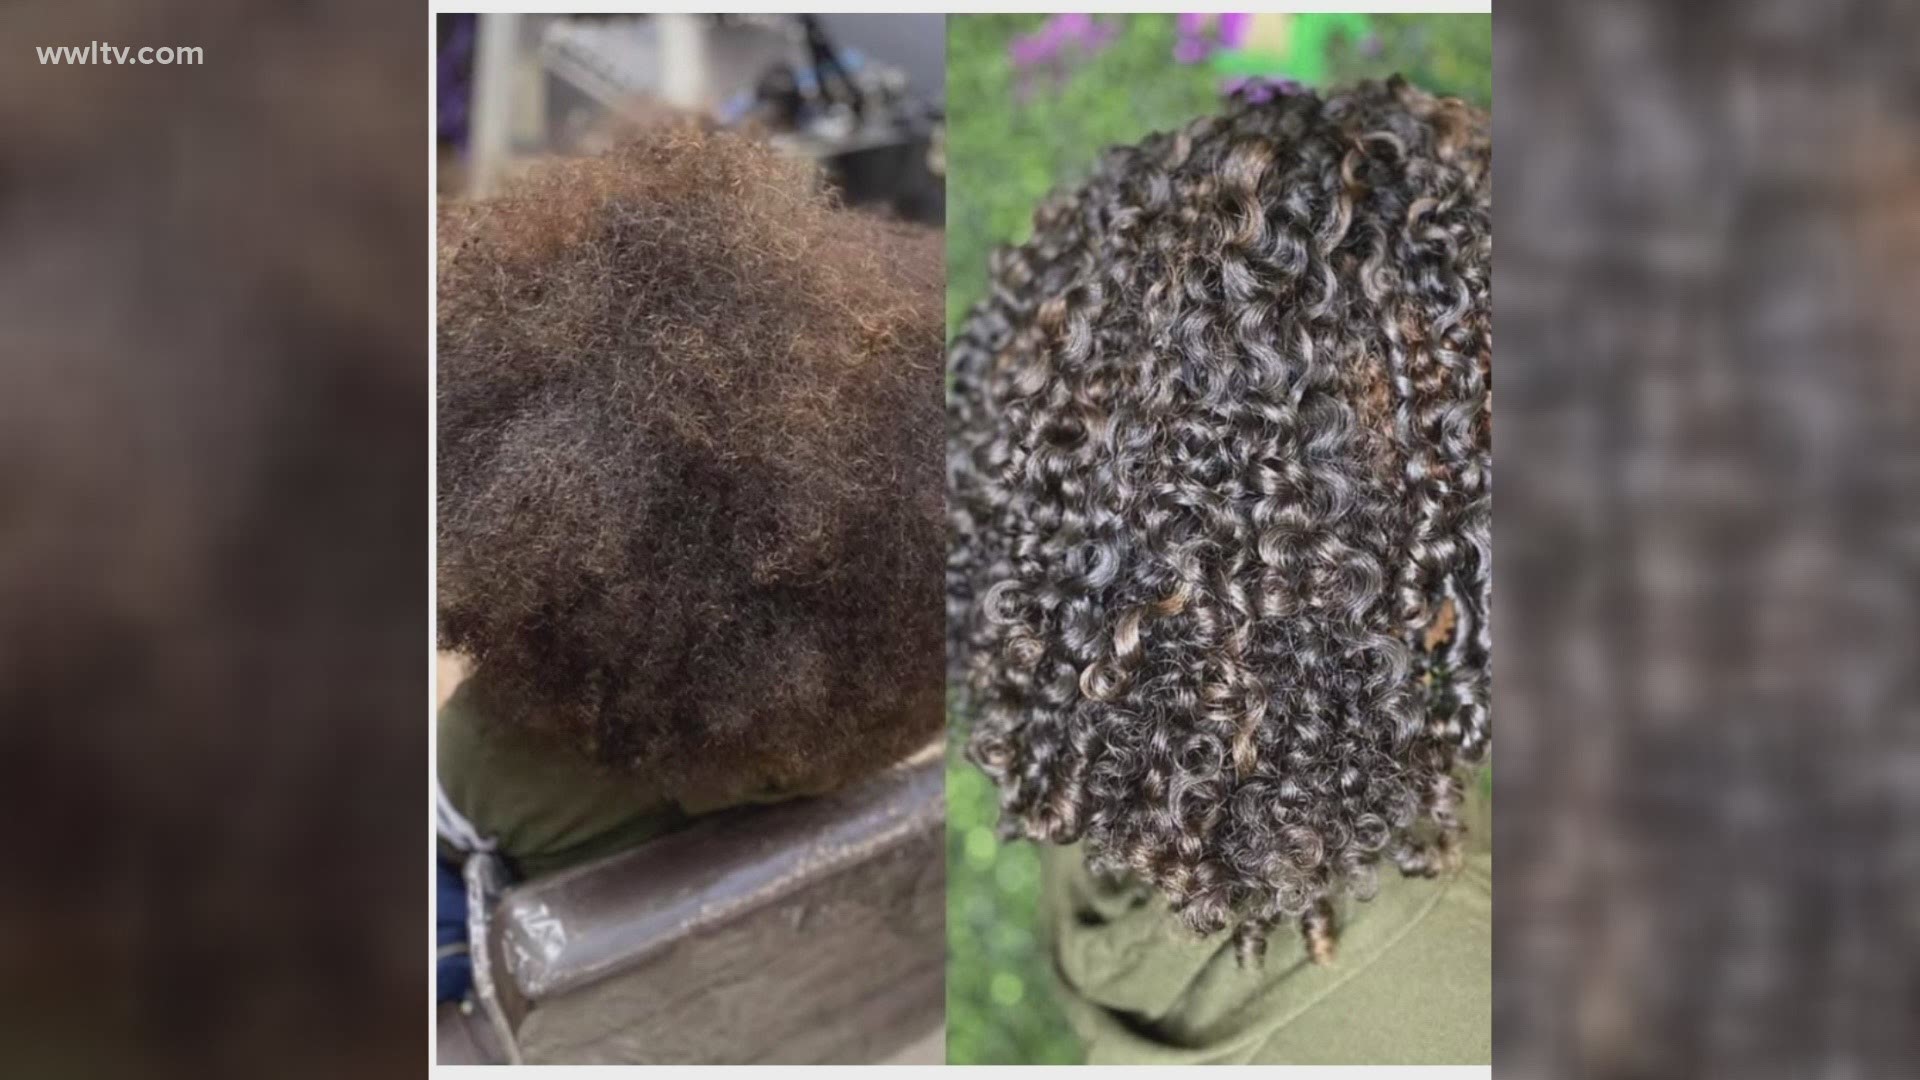 "We're really, really excited to bring these natural hair products to you guys — non-toxic," the pair said.